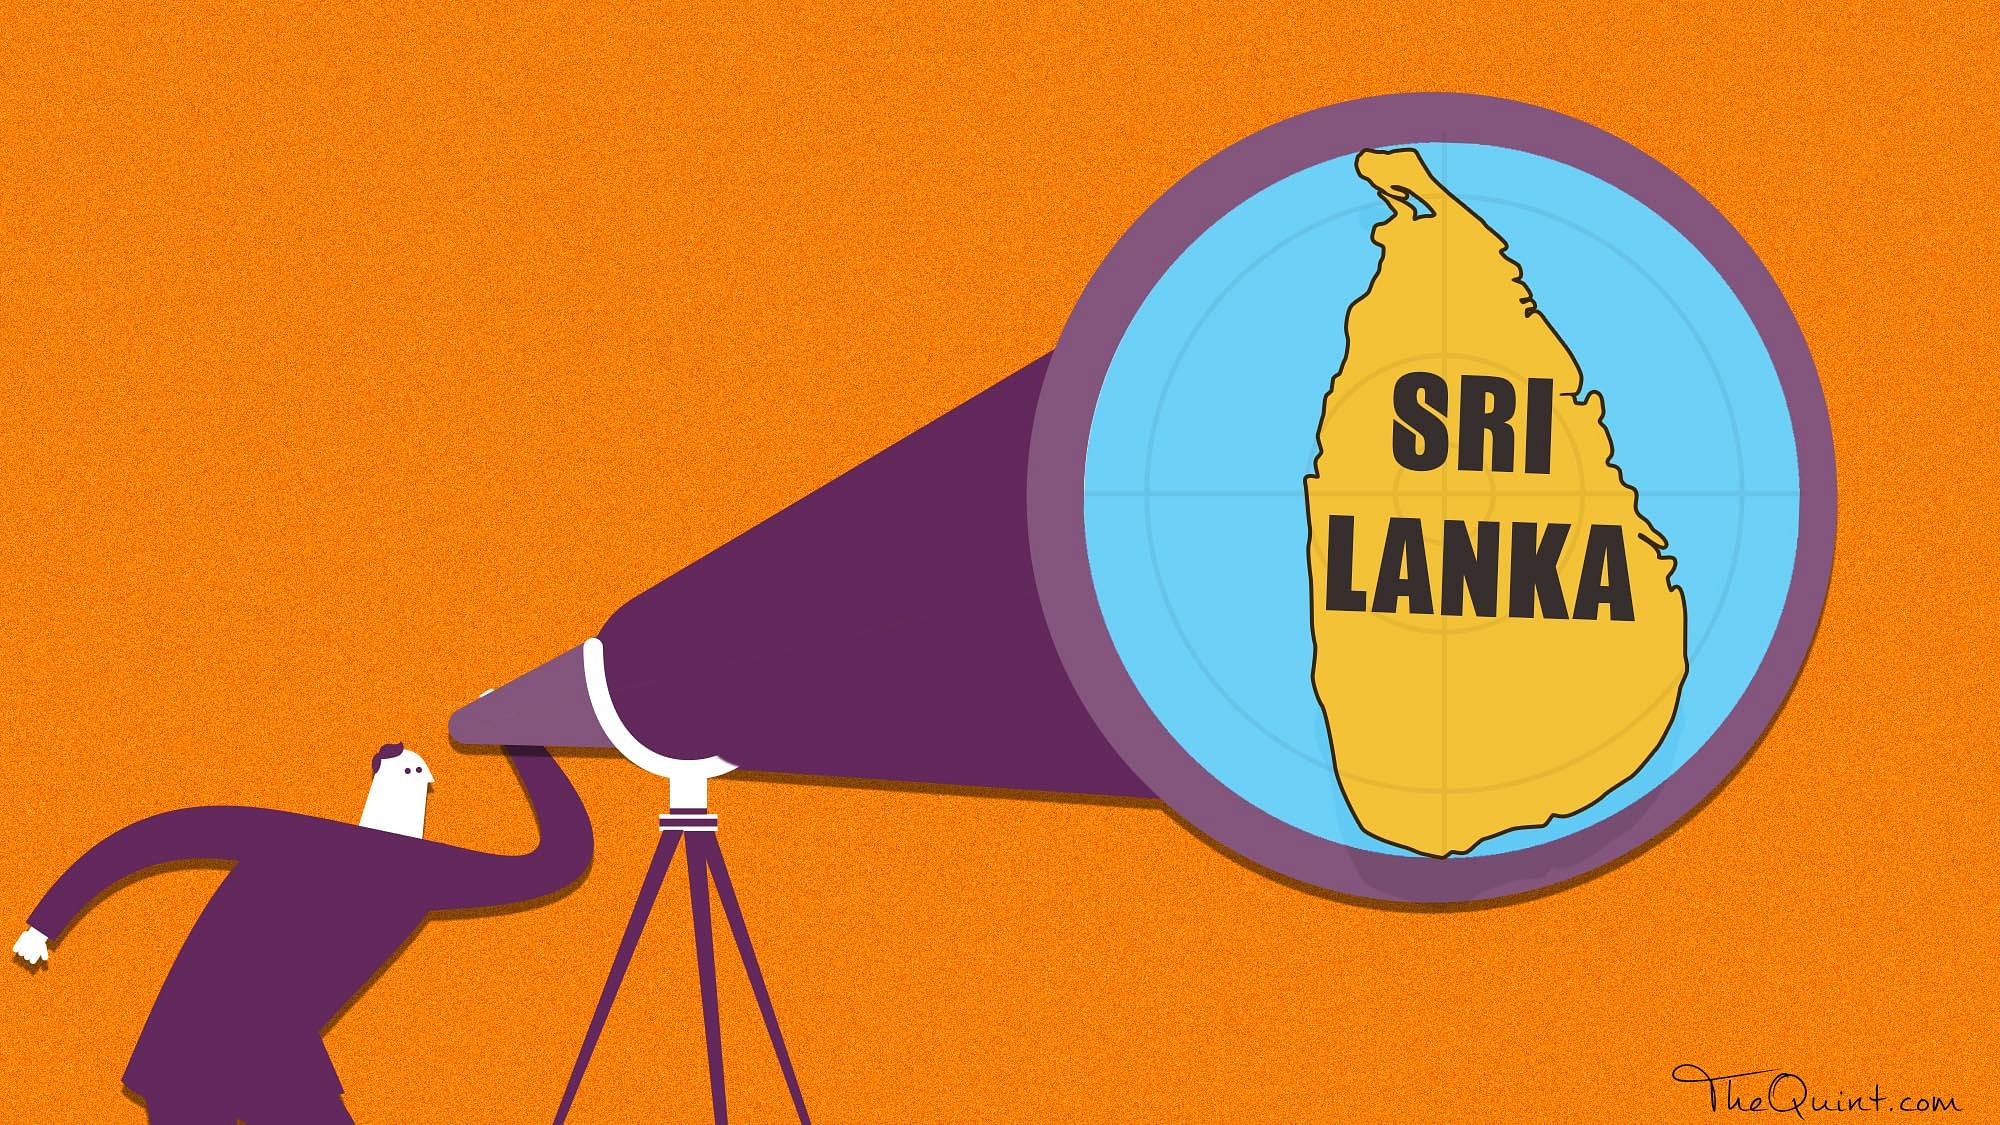 Through unscrupulous financing and debt, NYT reports how Sri Lanka’s Hambantota Port was taken over by China.